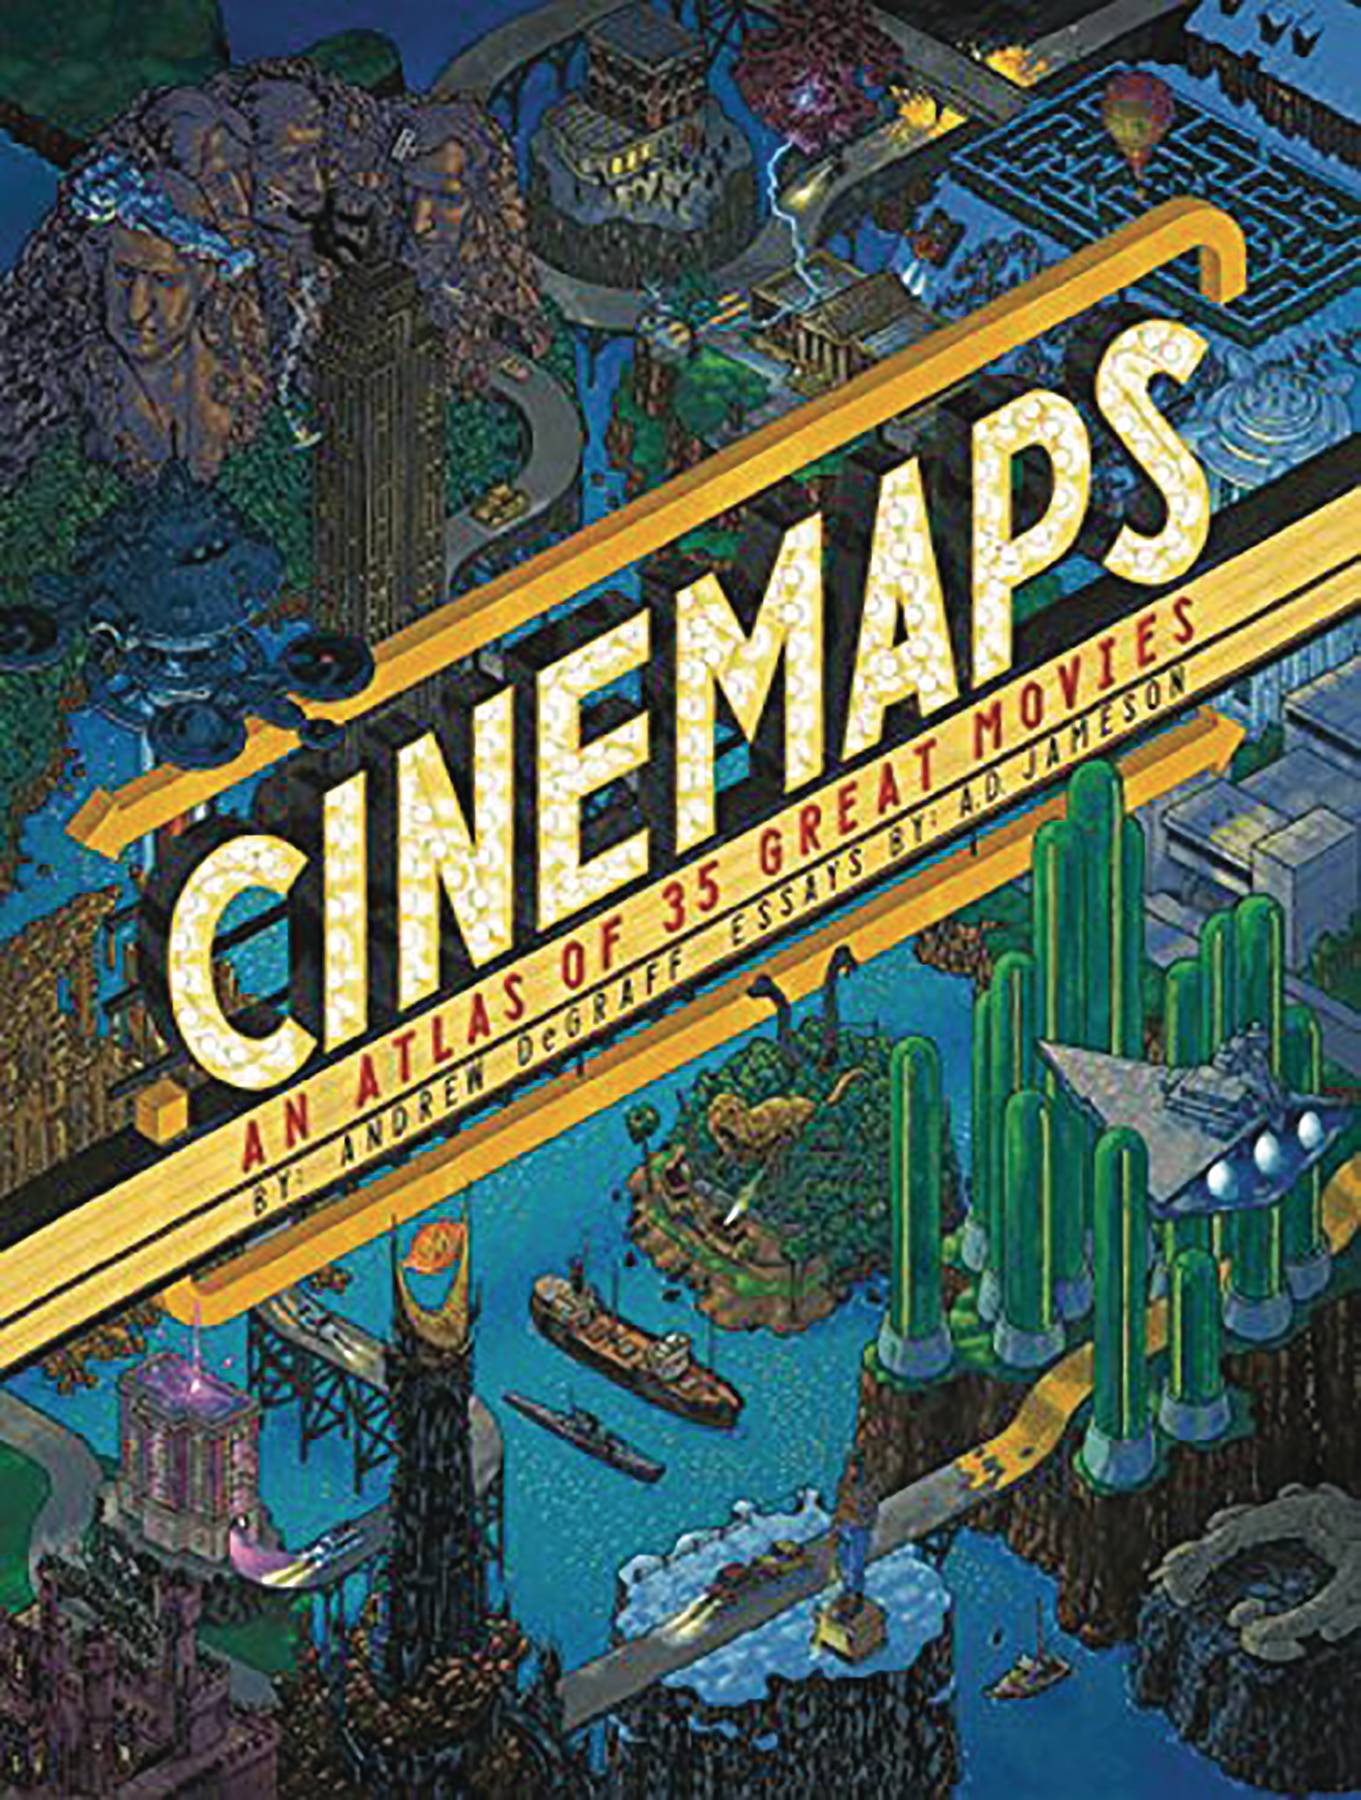 Cinemaps An Atlas of 35 Great Movies Hardcover